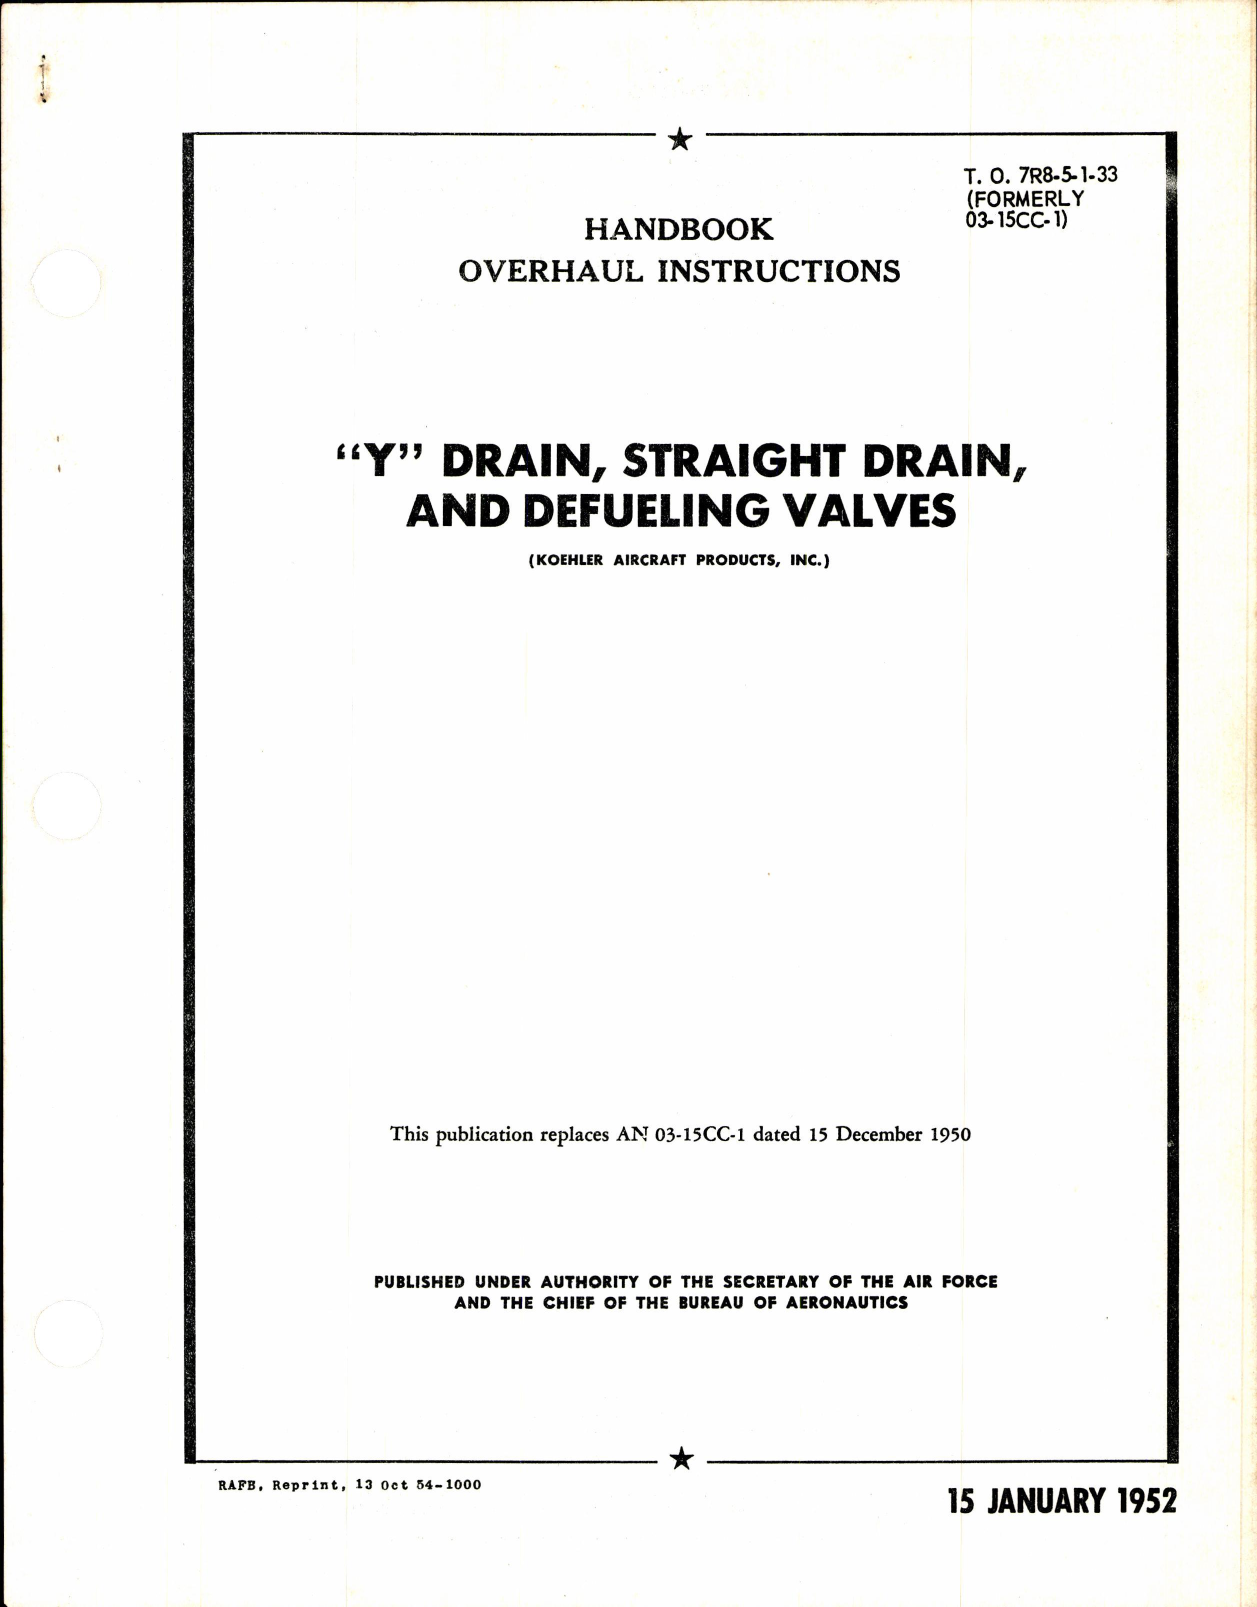 Sample page 1 from AirCorps Library document: Overhaul Instructions for Y Drain, Straight Drain & Defuling Valves